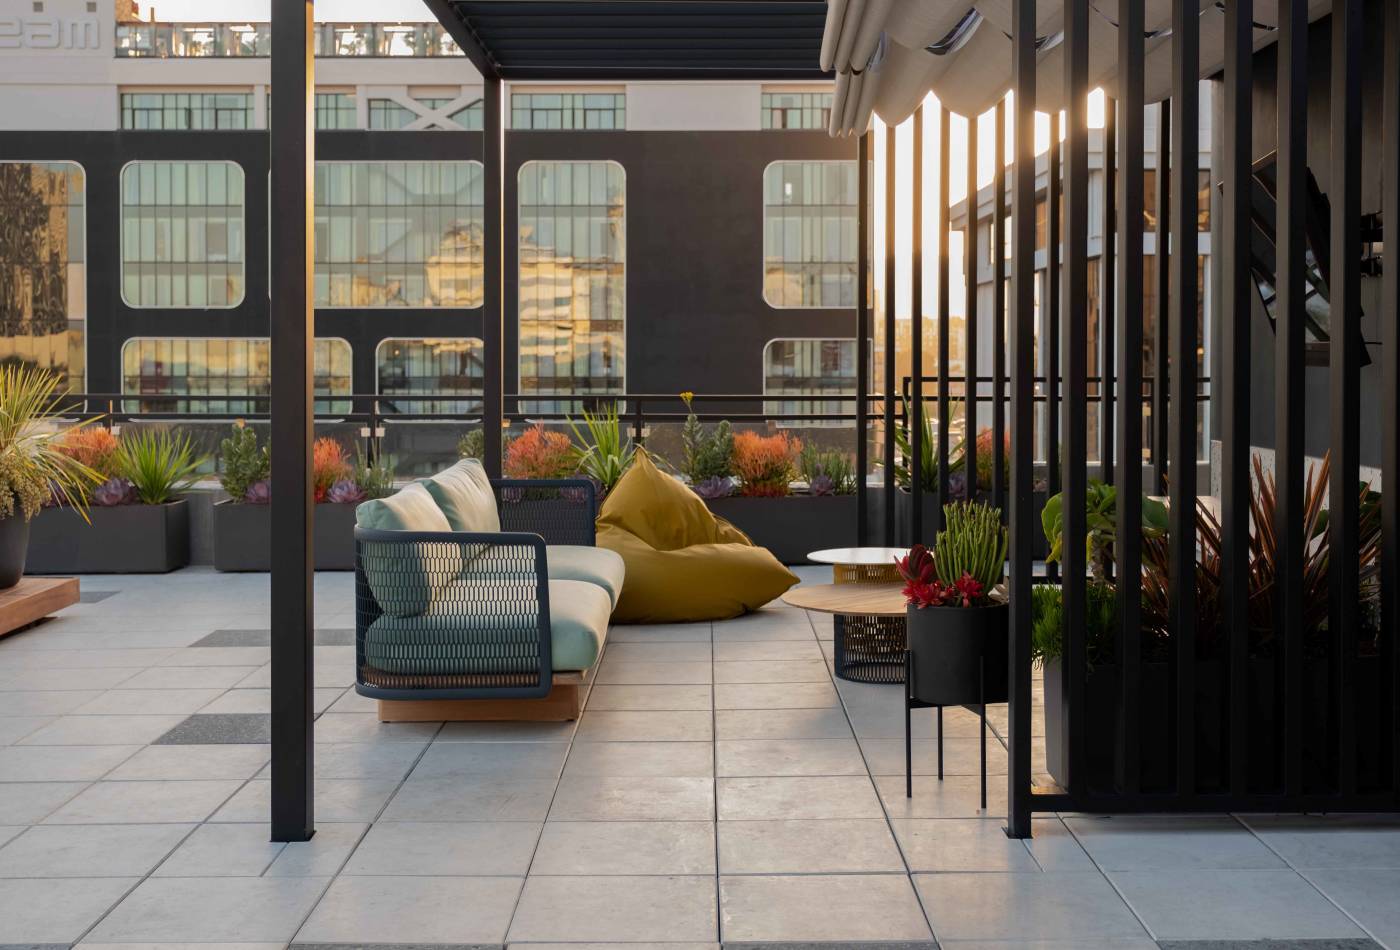 In 2003, an underutilized 42,000 sf warehouse in Hollywood was converted to 47 residential lofts. In 2017, when the building’s new owners opted to renovate, we were brought on board to reimagine the ground-floor lobby and fifth-floor rooftop. 